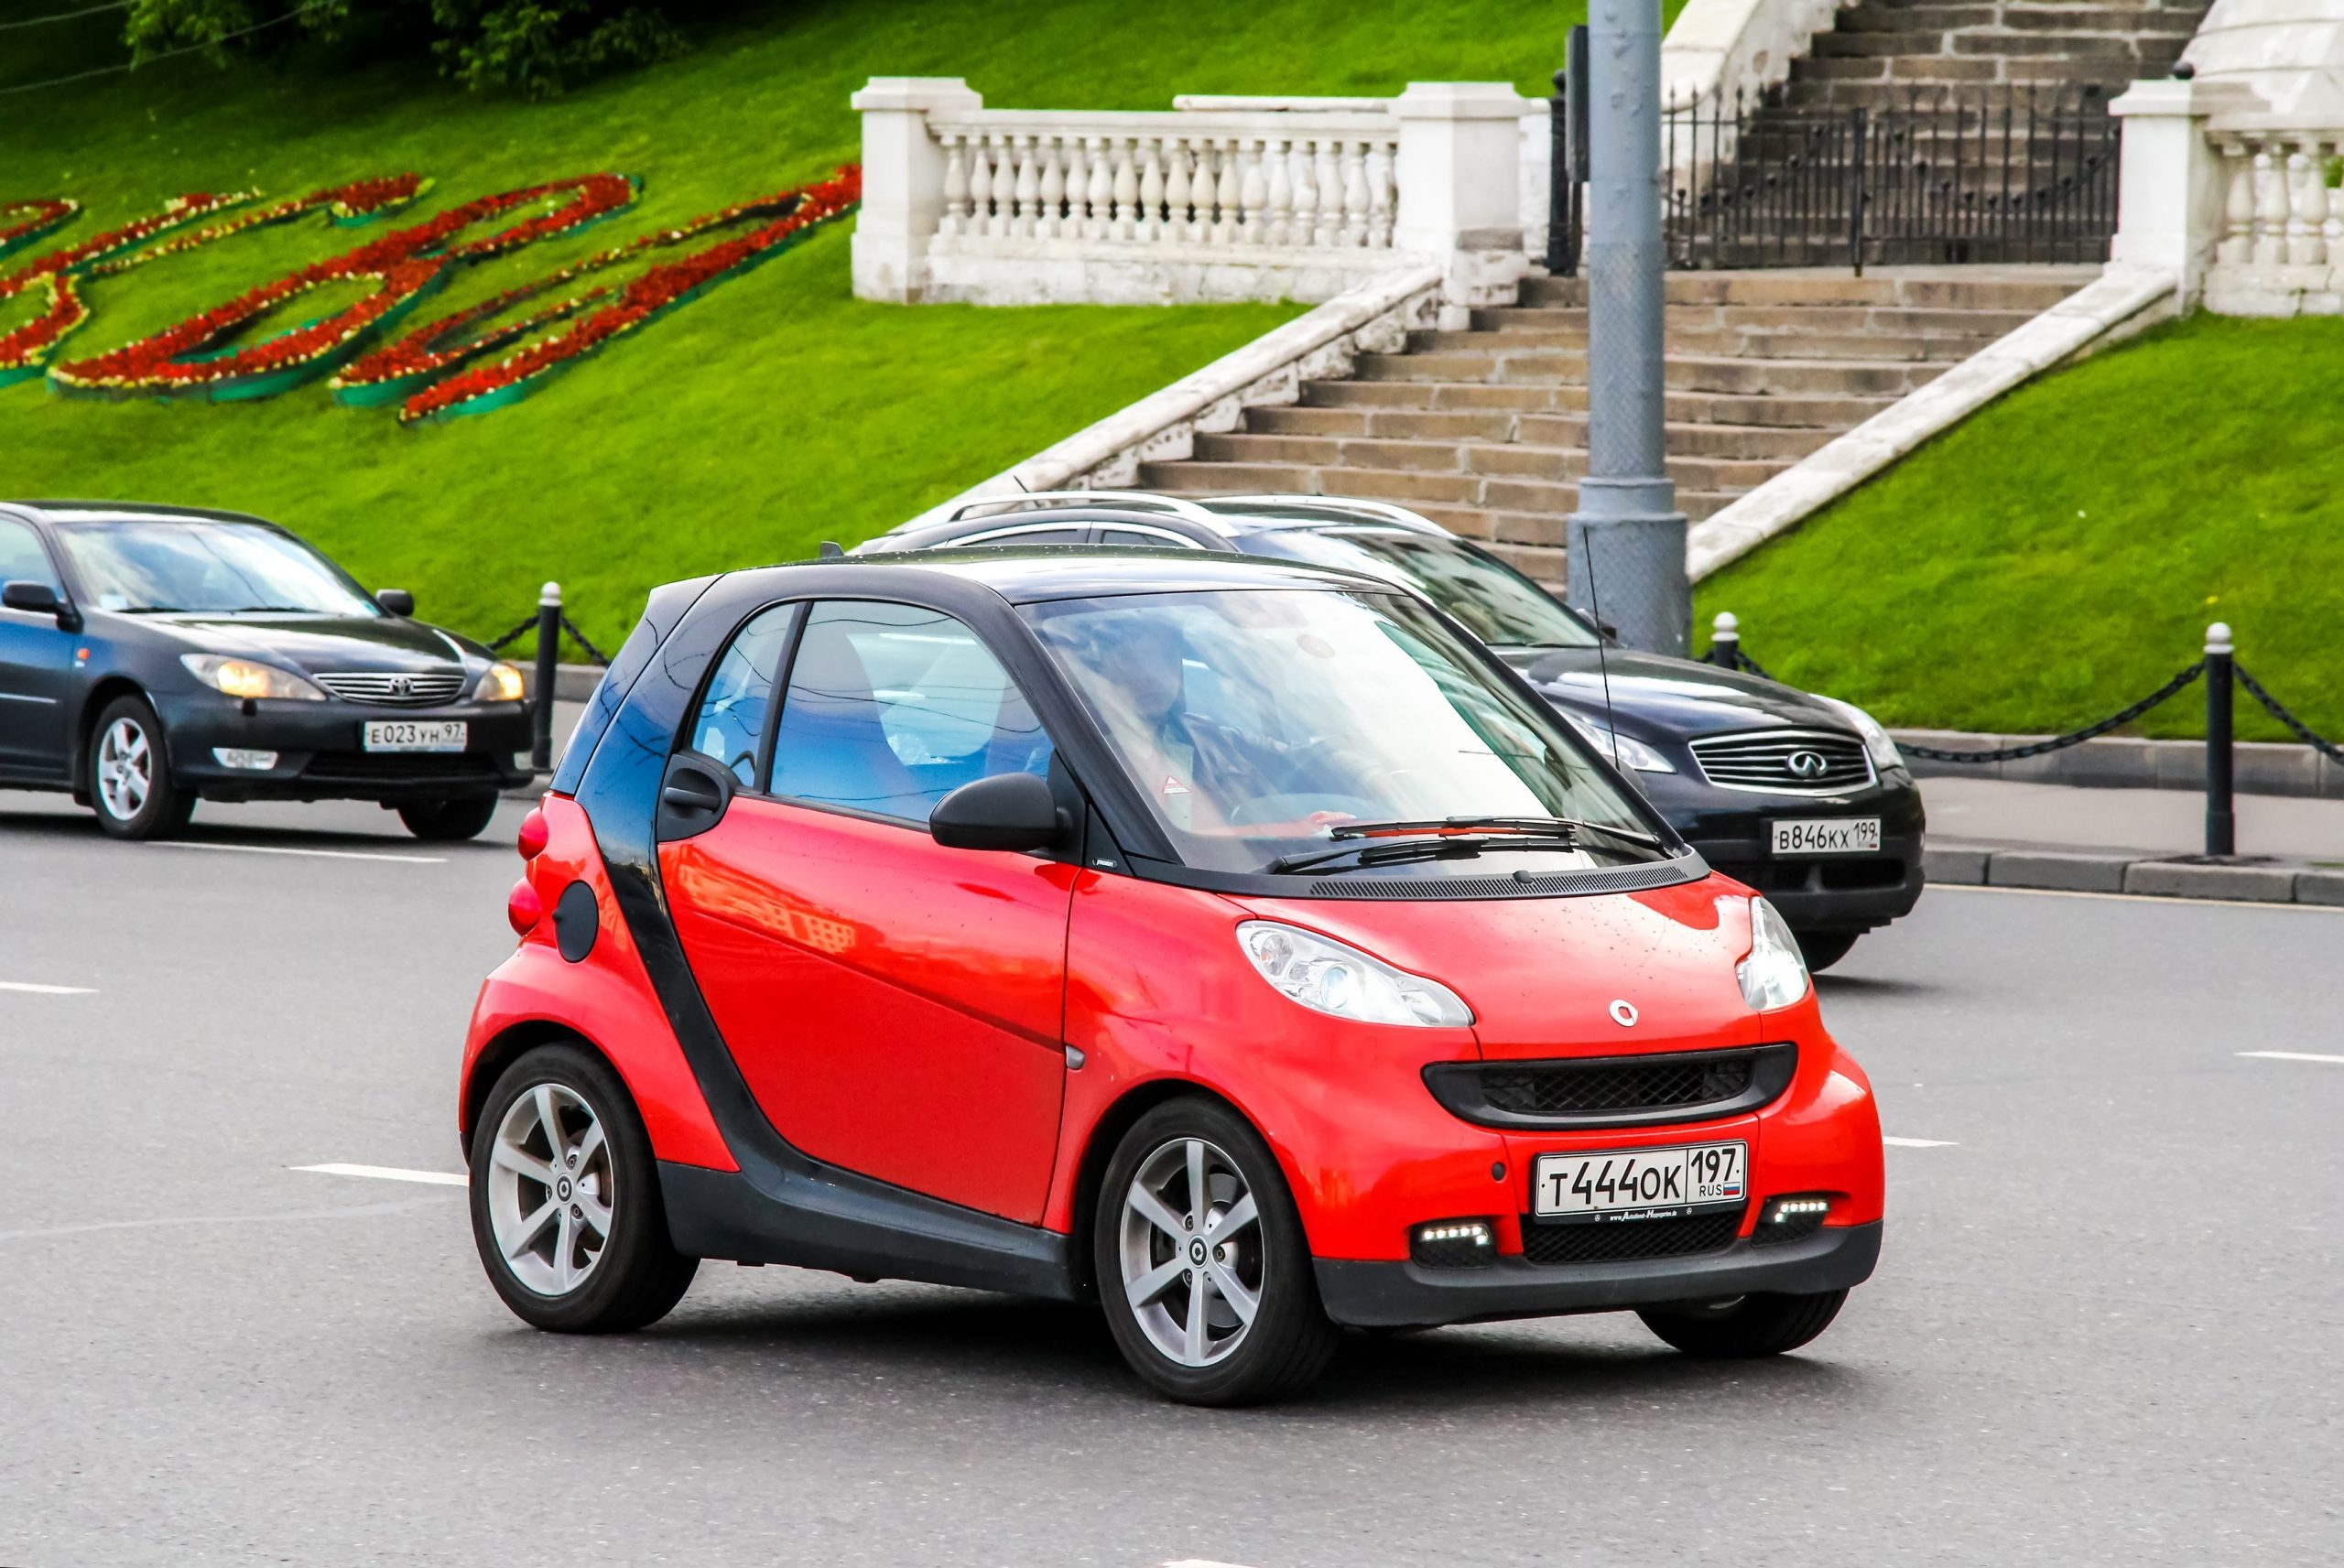 https://www.selection.ca/wp-content/uploads/2016/03/voiture-smart-scaled.jpg